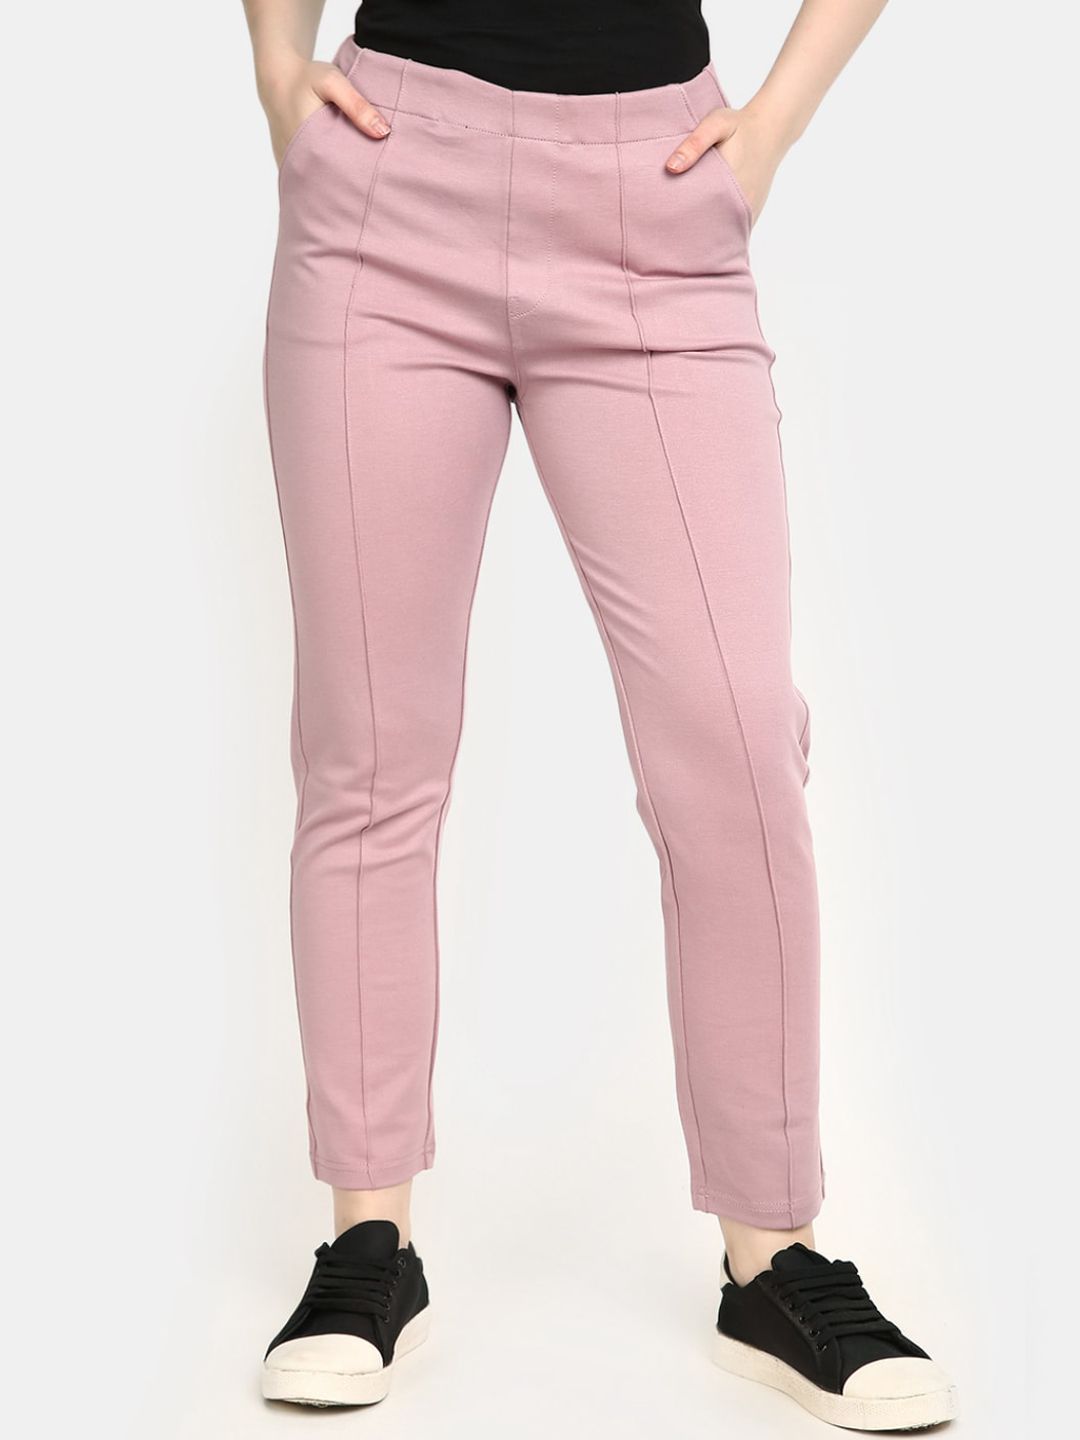 V-Mart Women Mid-Rise Cotton Regular Trousers Price in India